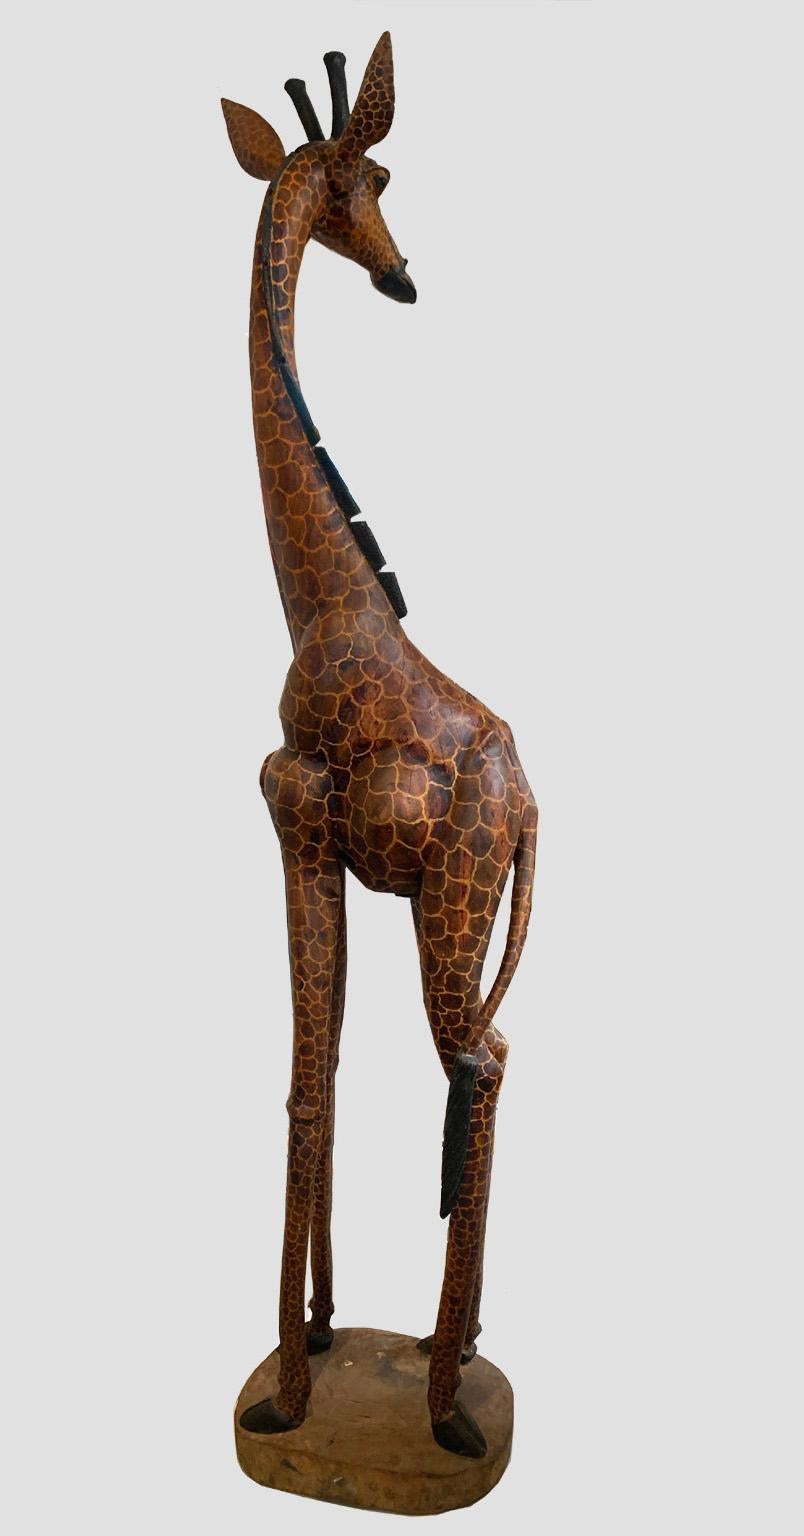 This is an amazing piece, hand carved from a single log. The details give a unique character to this giraffe. It was part of a collection originally commissioned by an African big game hunter turned photographer. It has a nice patina and beautiful